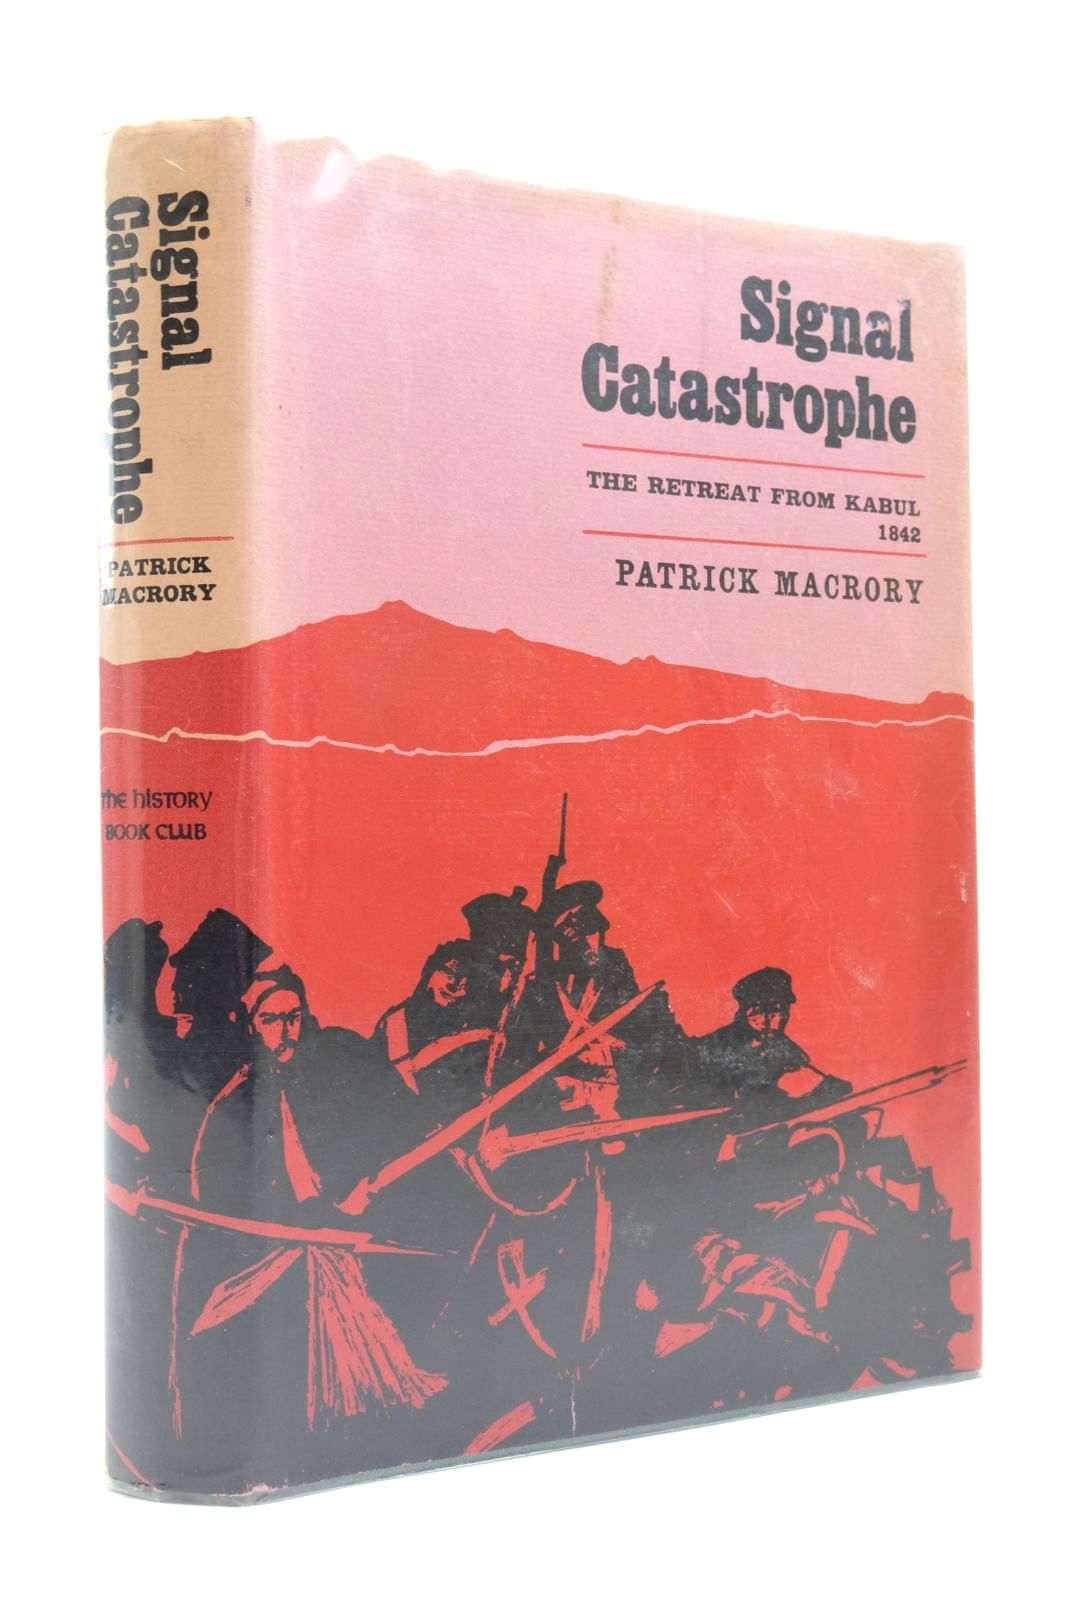 Photo of SIGNAL CATASTROPHE THE STORY OF THE DISASTROUS RETREAT FROM KABUL 1842 written by Macrory, Patrick published by The History Book Club (STOCK CODE: 2138557)  for sale by Stella & Rose's Books